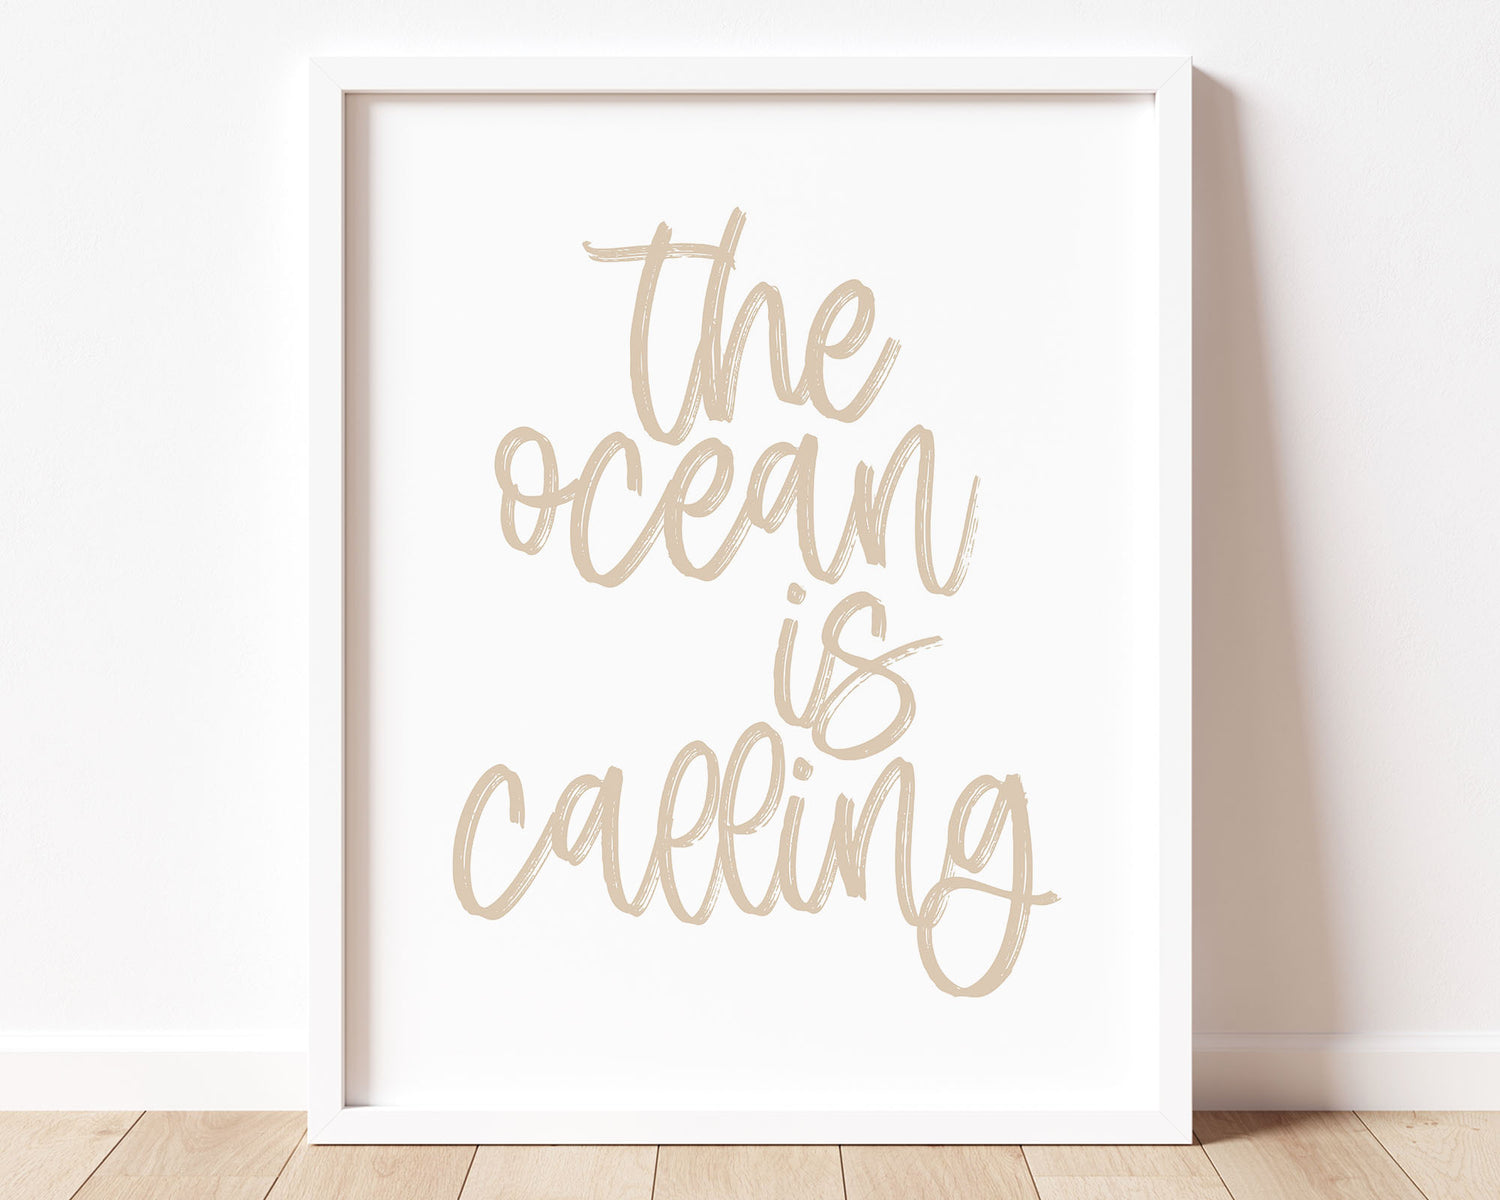 Neutral Tan The Ocean Is Calling Printable Wall Art featuring a textured brush style cursive lettered quote perfect for Baby Boy Nautical Nursery Decor, Baby Girl Surf Nursery Wall Art, Nautical Kids Bedroom Decor or Children's Coastal Wall Art.